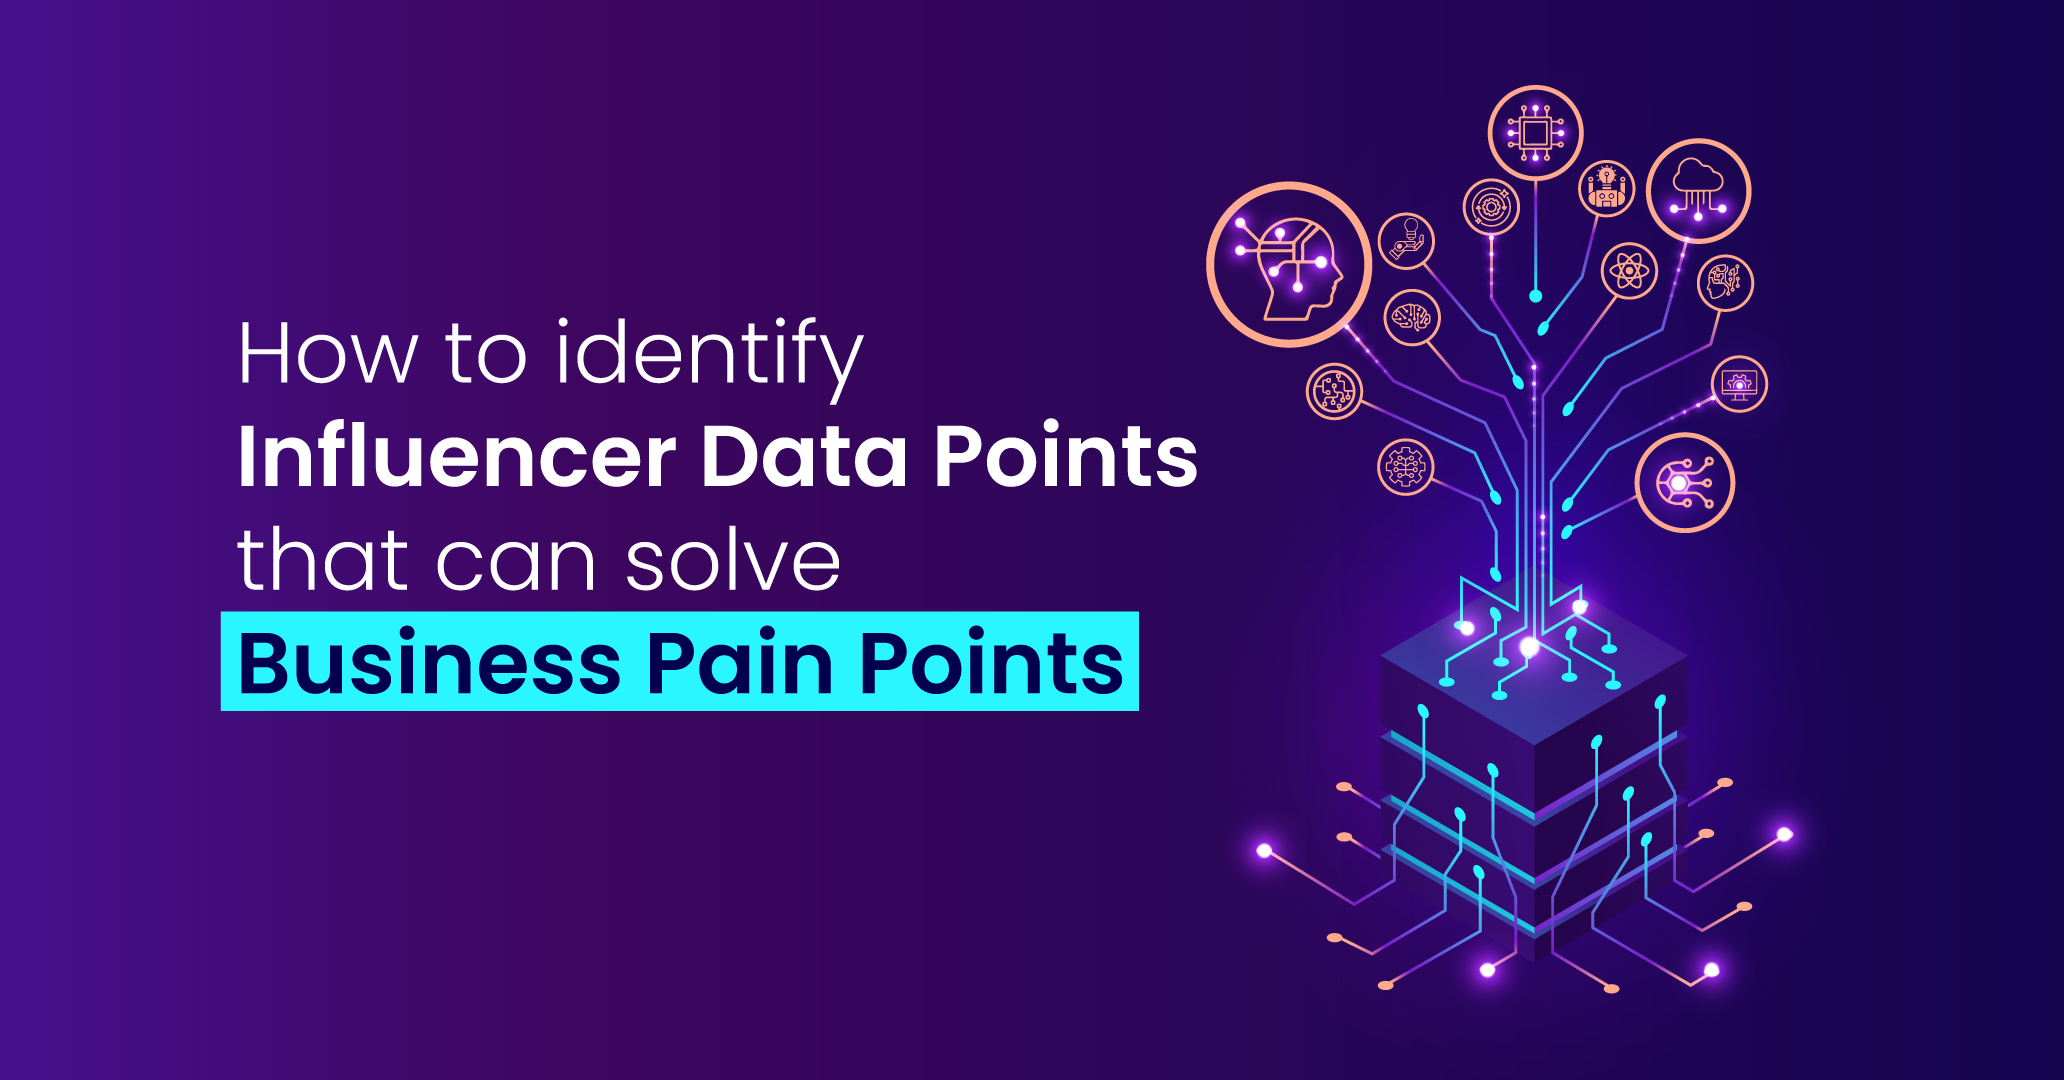 Identify Influencer Data Points that can solve business pain points